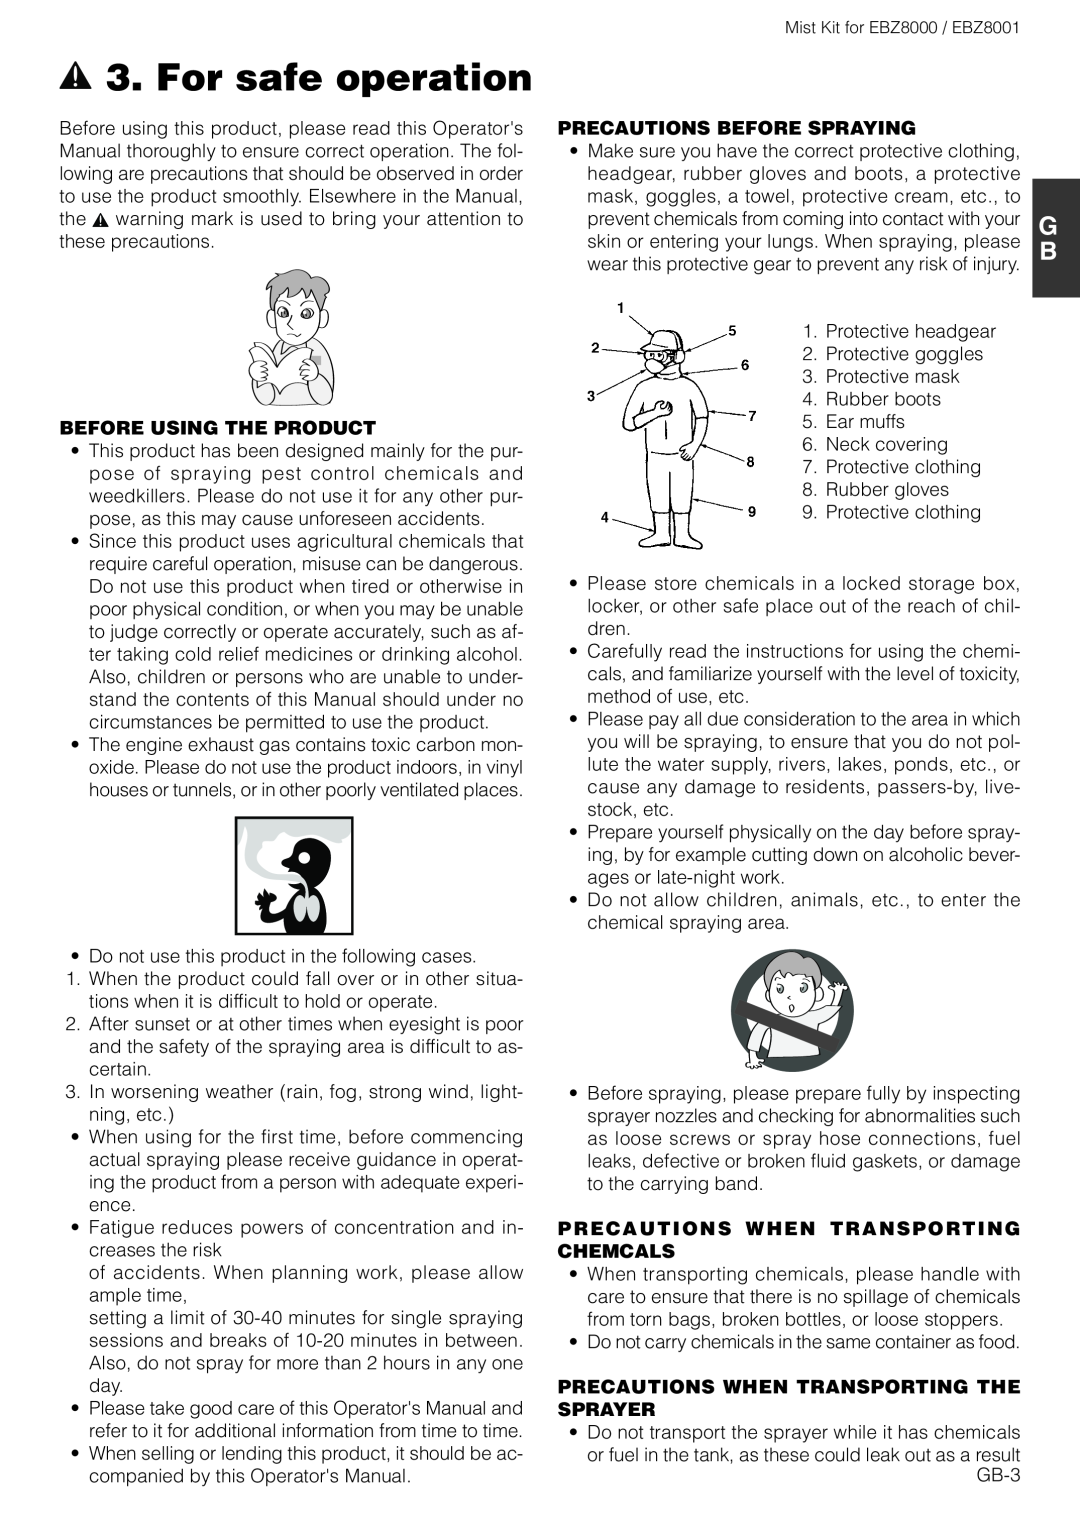 Zenoah EBZ8000 owner manual For safe operation, Before Using The Product, Precautions Before Spraying 